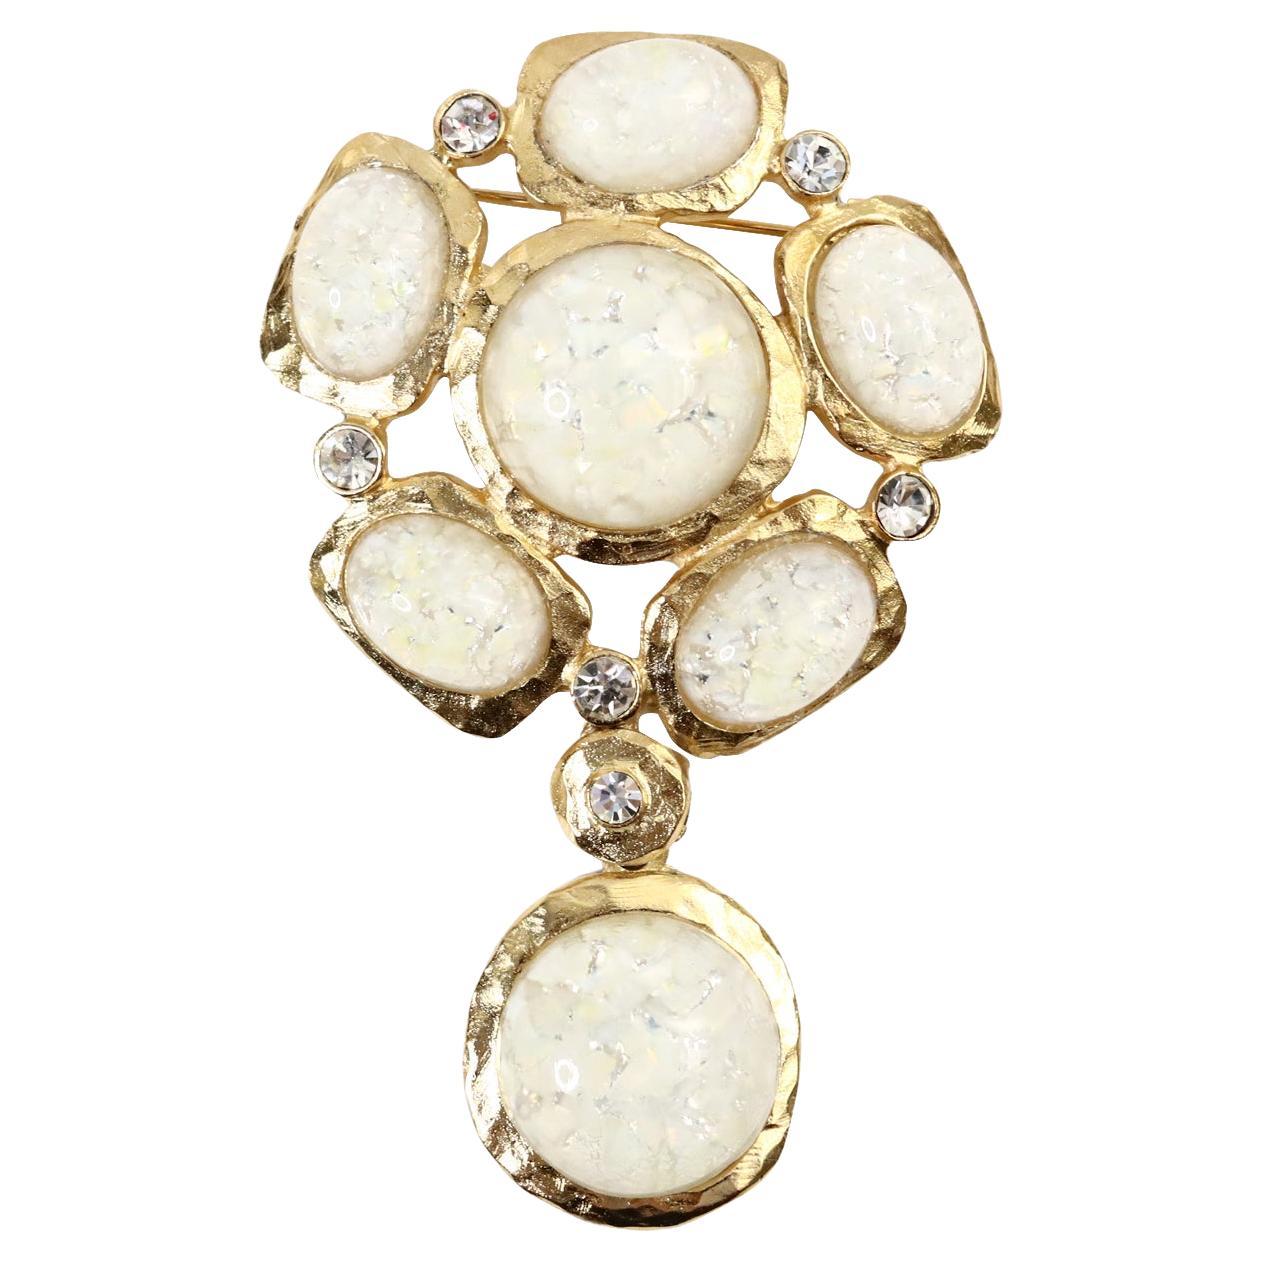 The Collective KJL Hamered Gold with Opal Cabochon Drop Brooch, circa 2000s